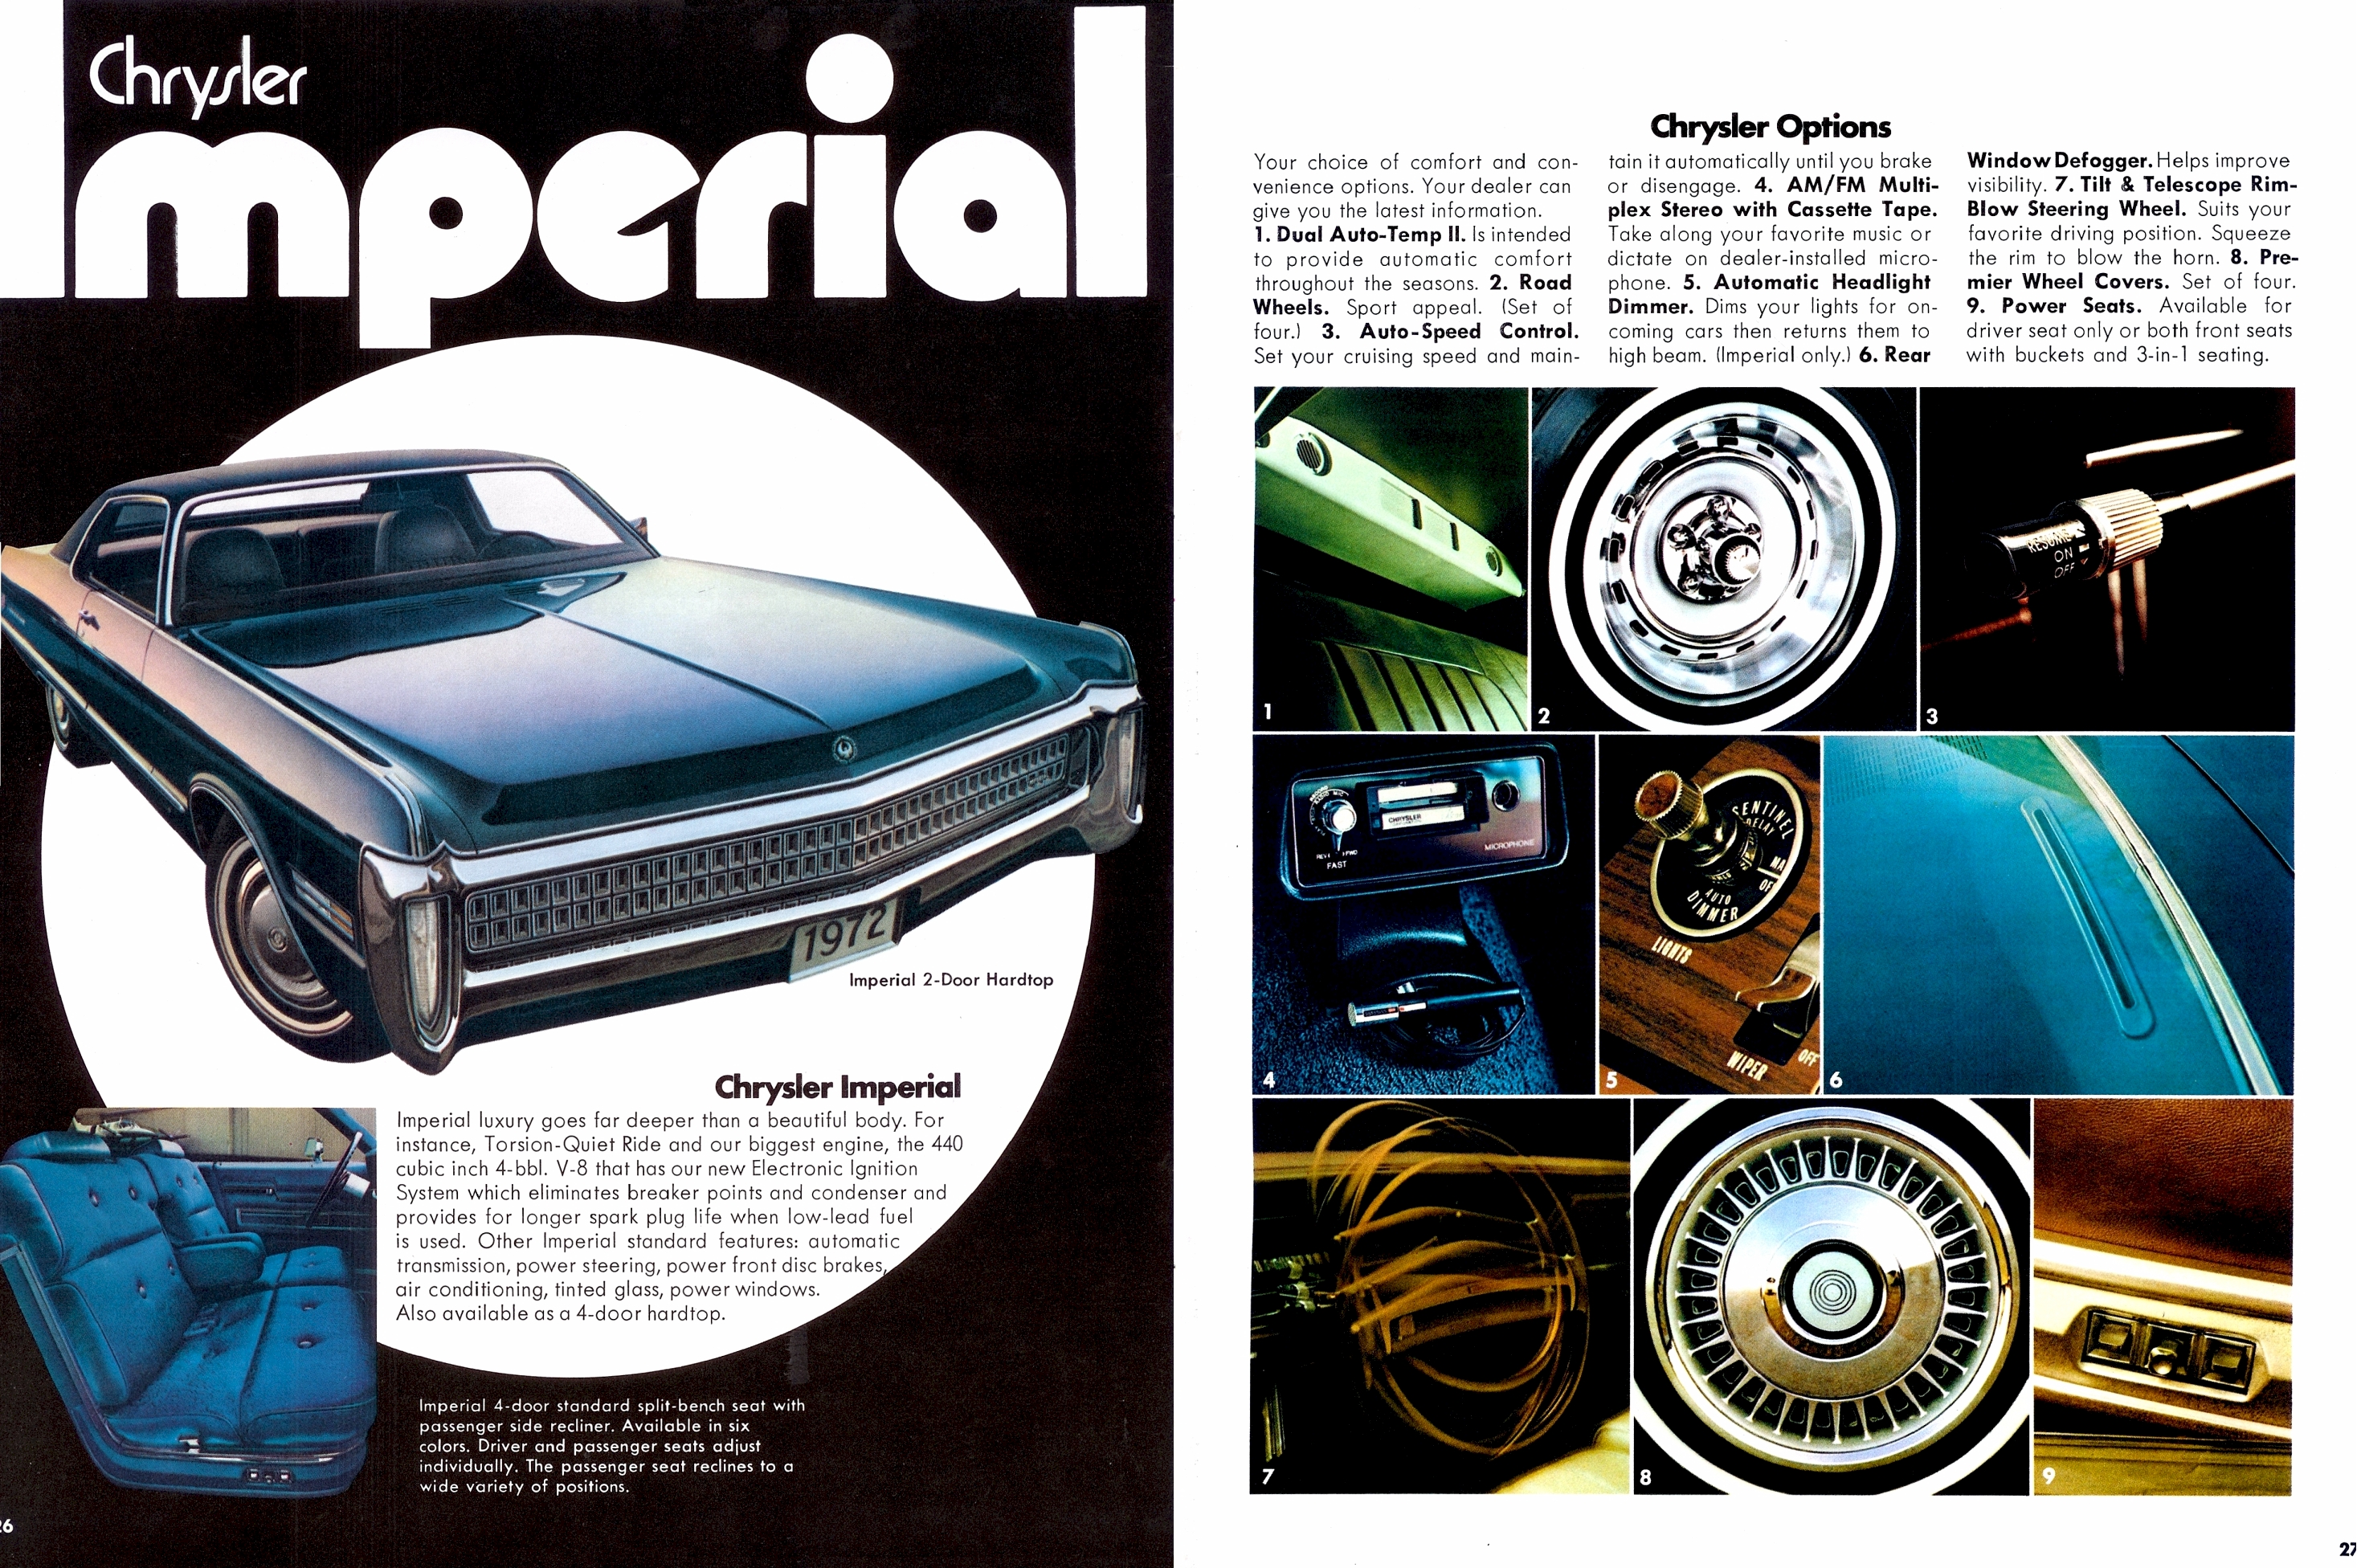 Newport New Yorker Imperial Plymouth 1973 Chrysler 34-page Car Sales Brochure 